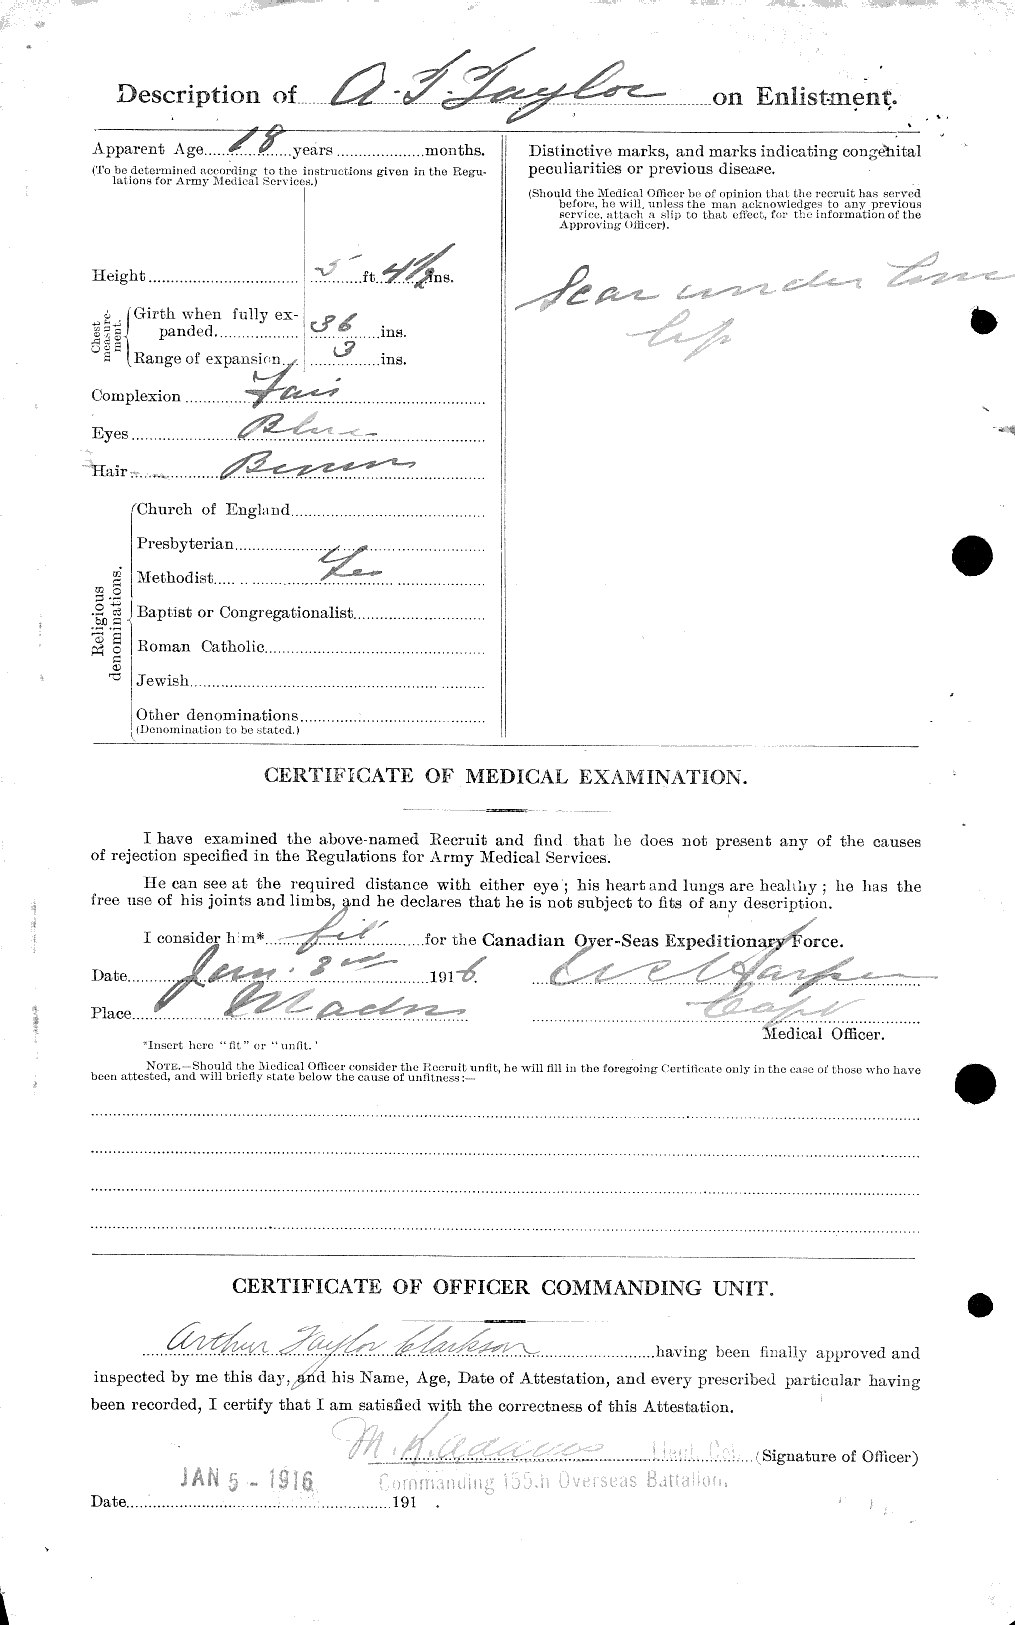 Personnel Records of the First World War - CEF 023619b